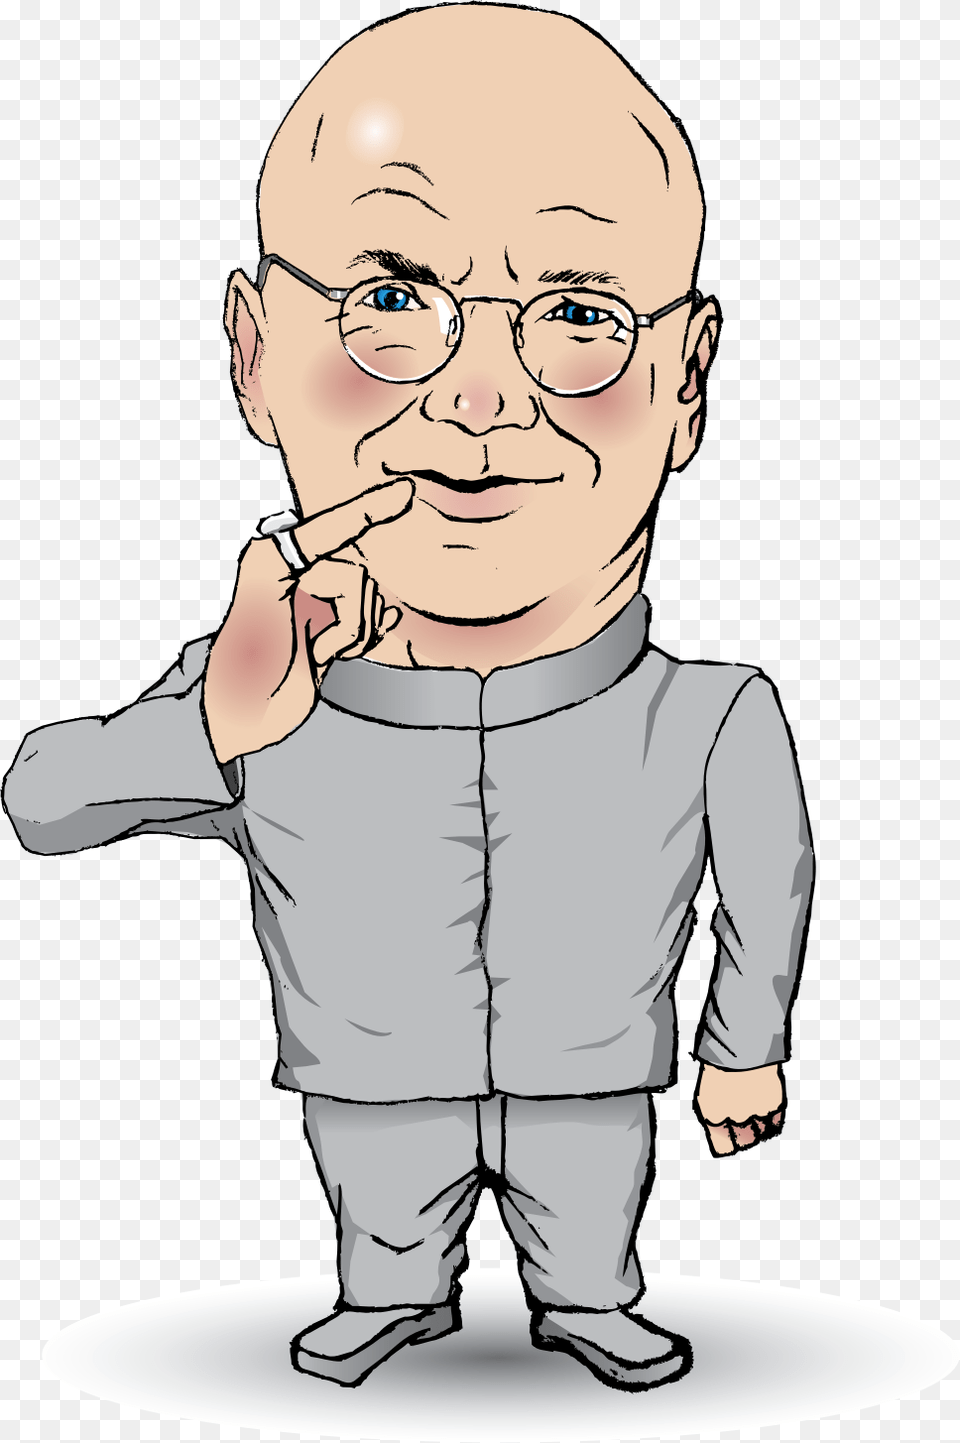 Man Person Google Search Vector Graphic On Pixabay Cartoon Doctor Evil, Baby, Publication, Book, Comics Free Png